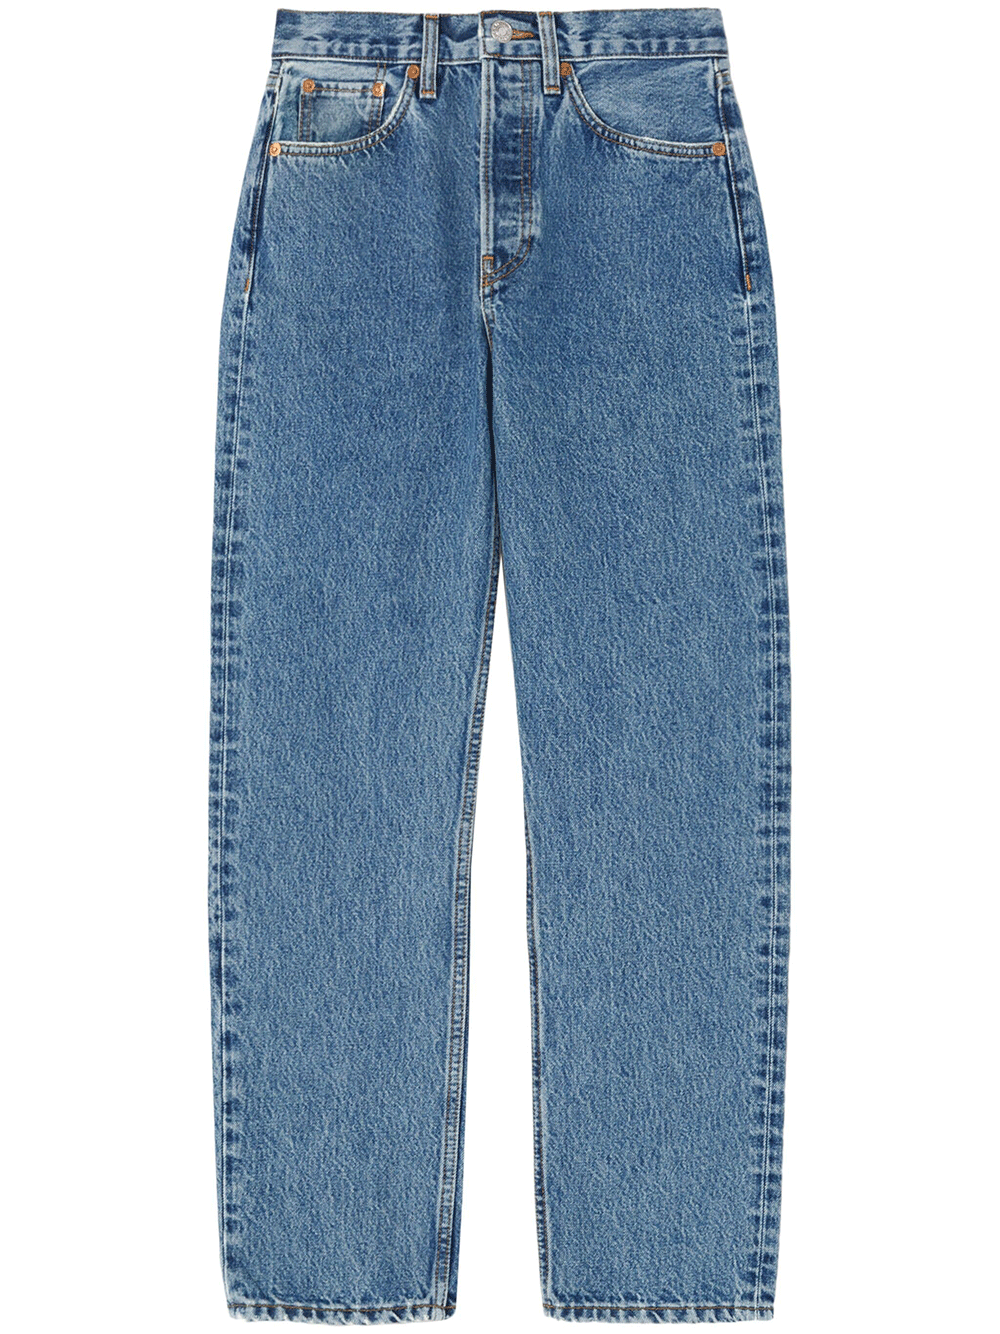 REDONE-70S-Stove-Pipe-Jeans-Blue-1